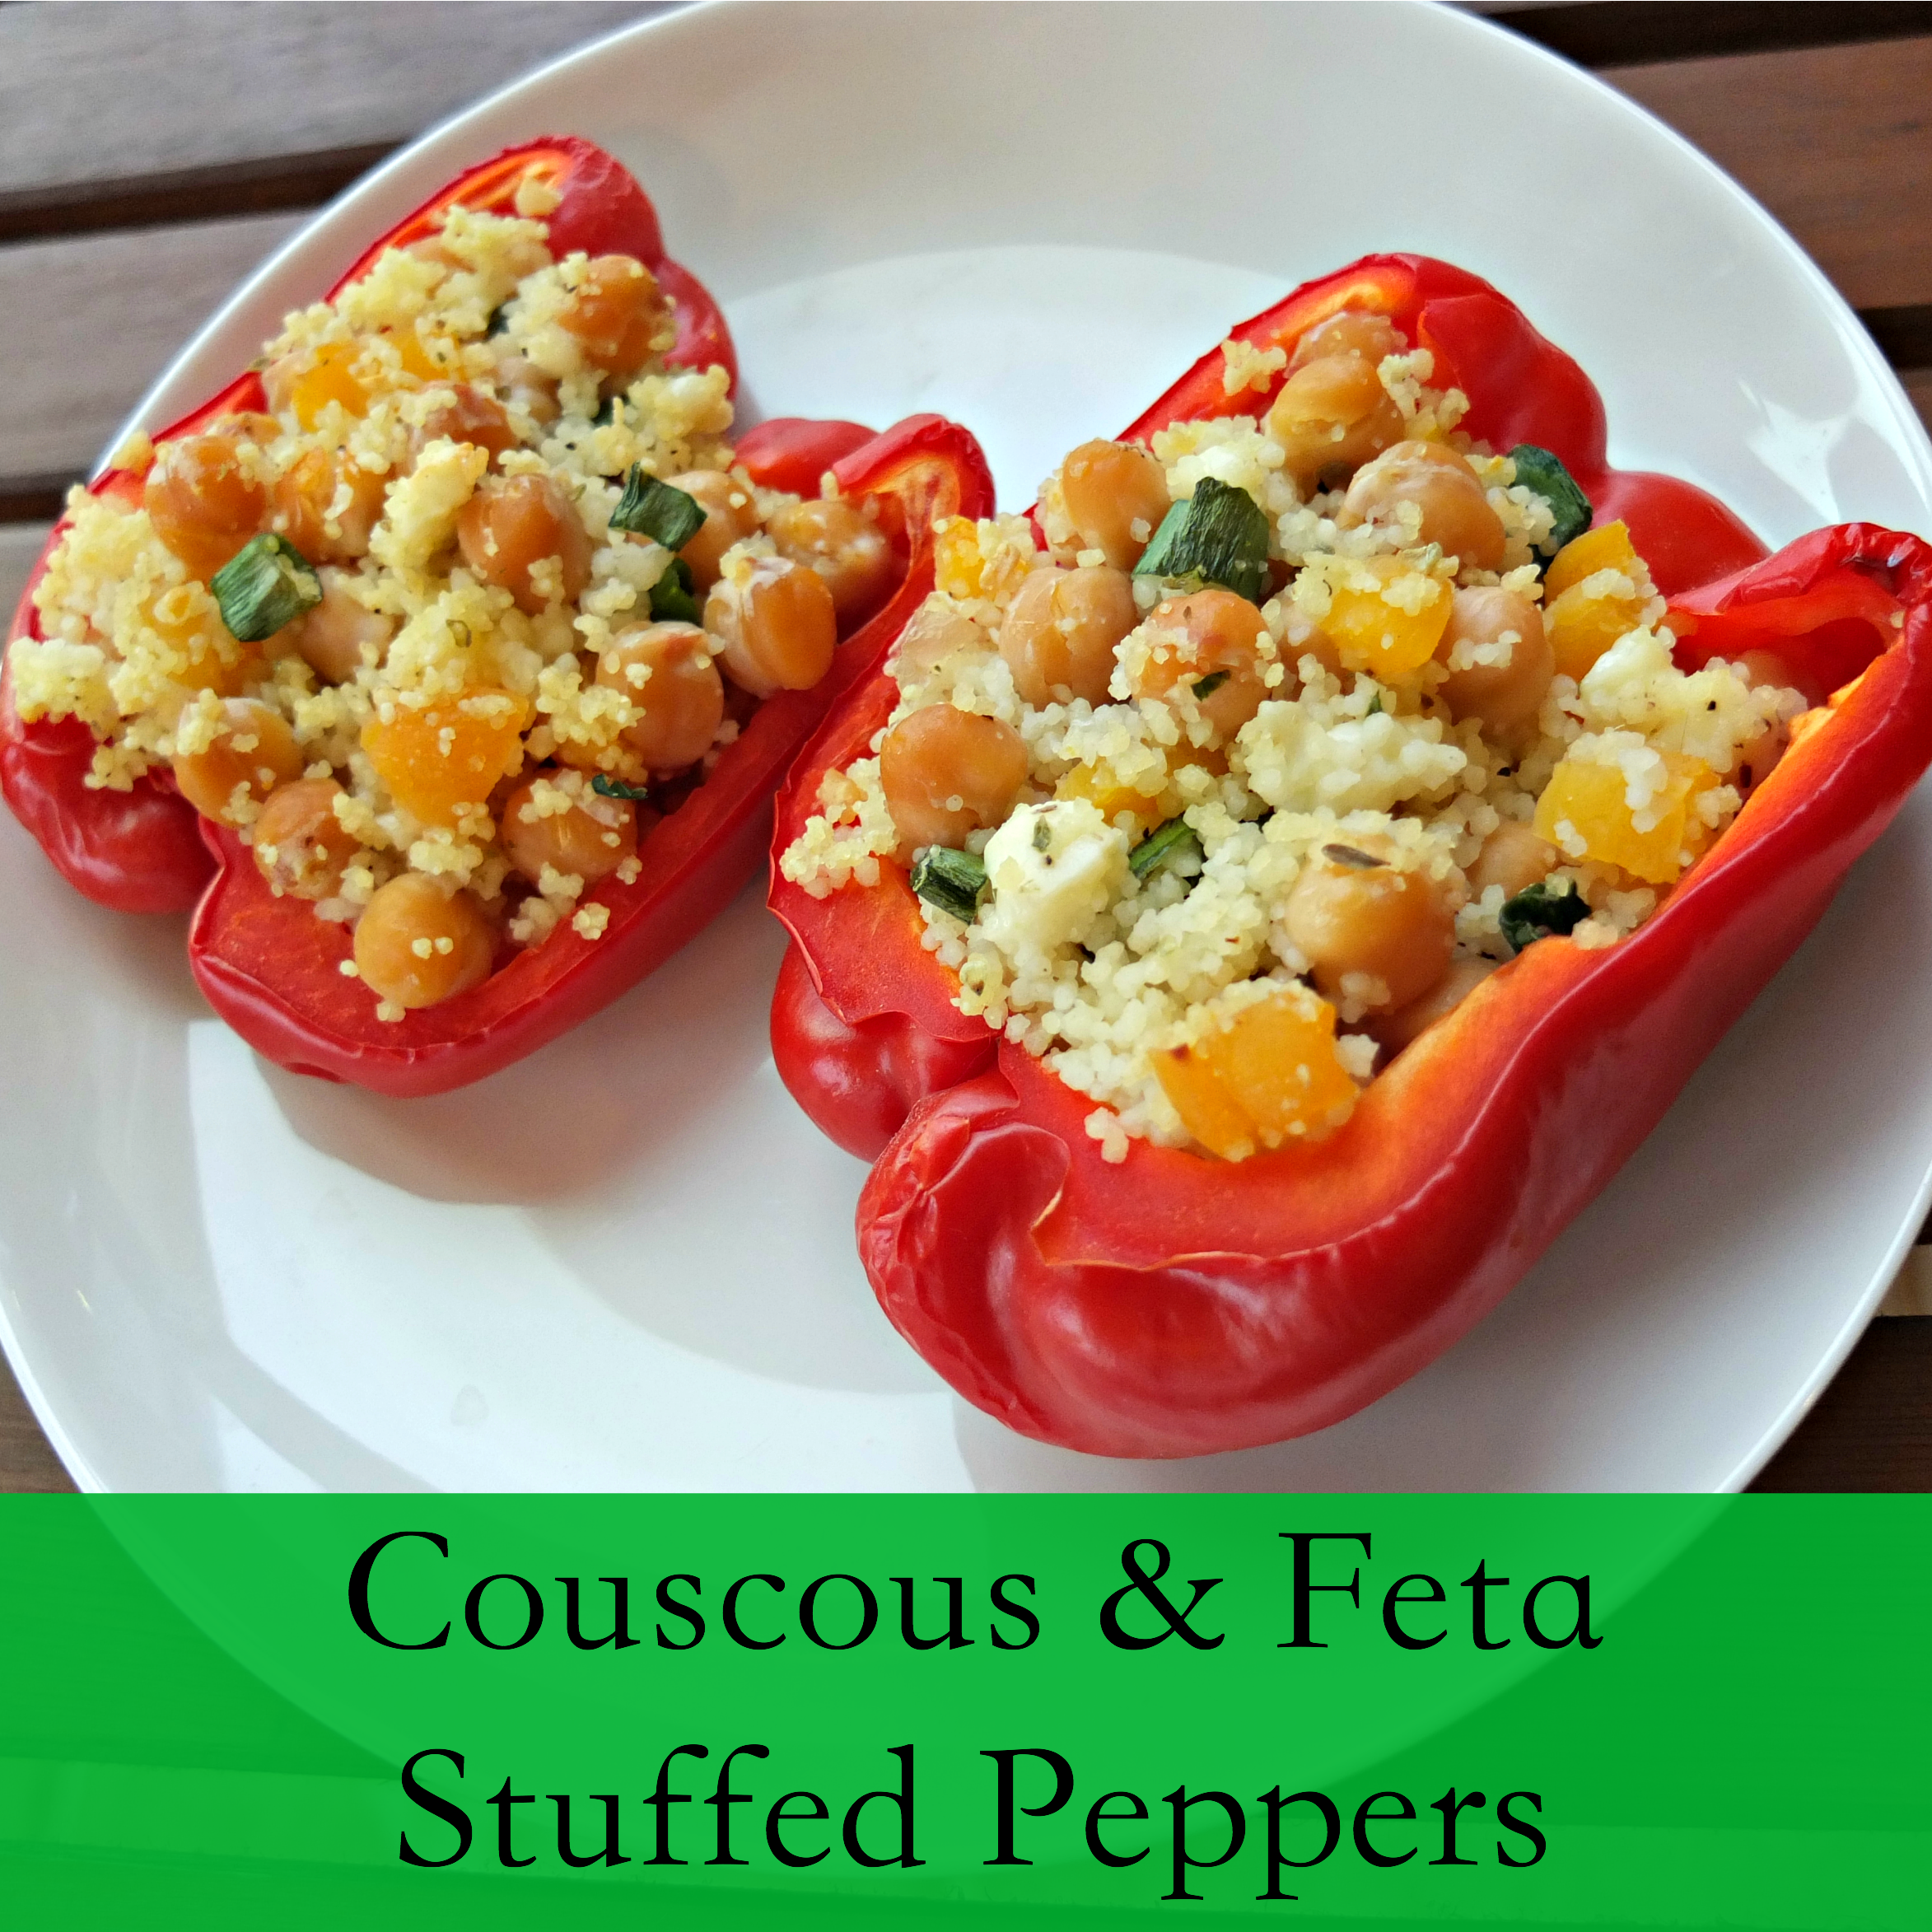 Couscous and Feta Stuffed Peppers